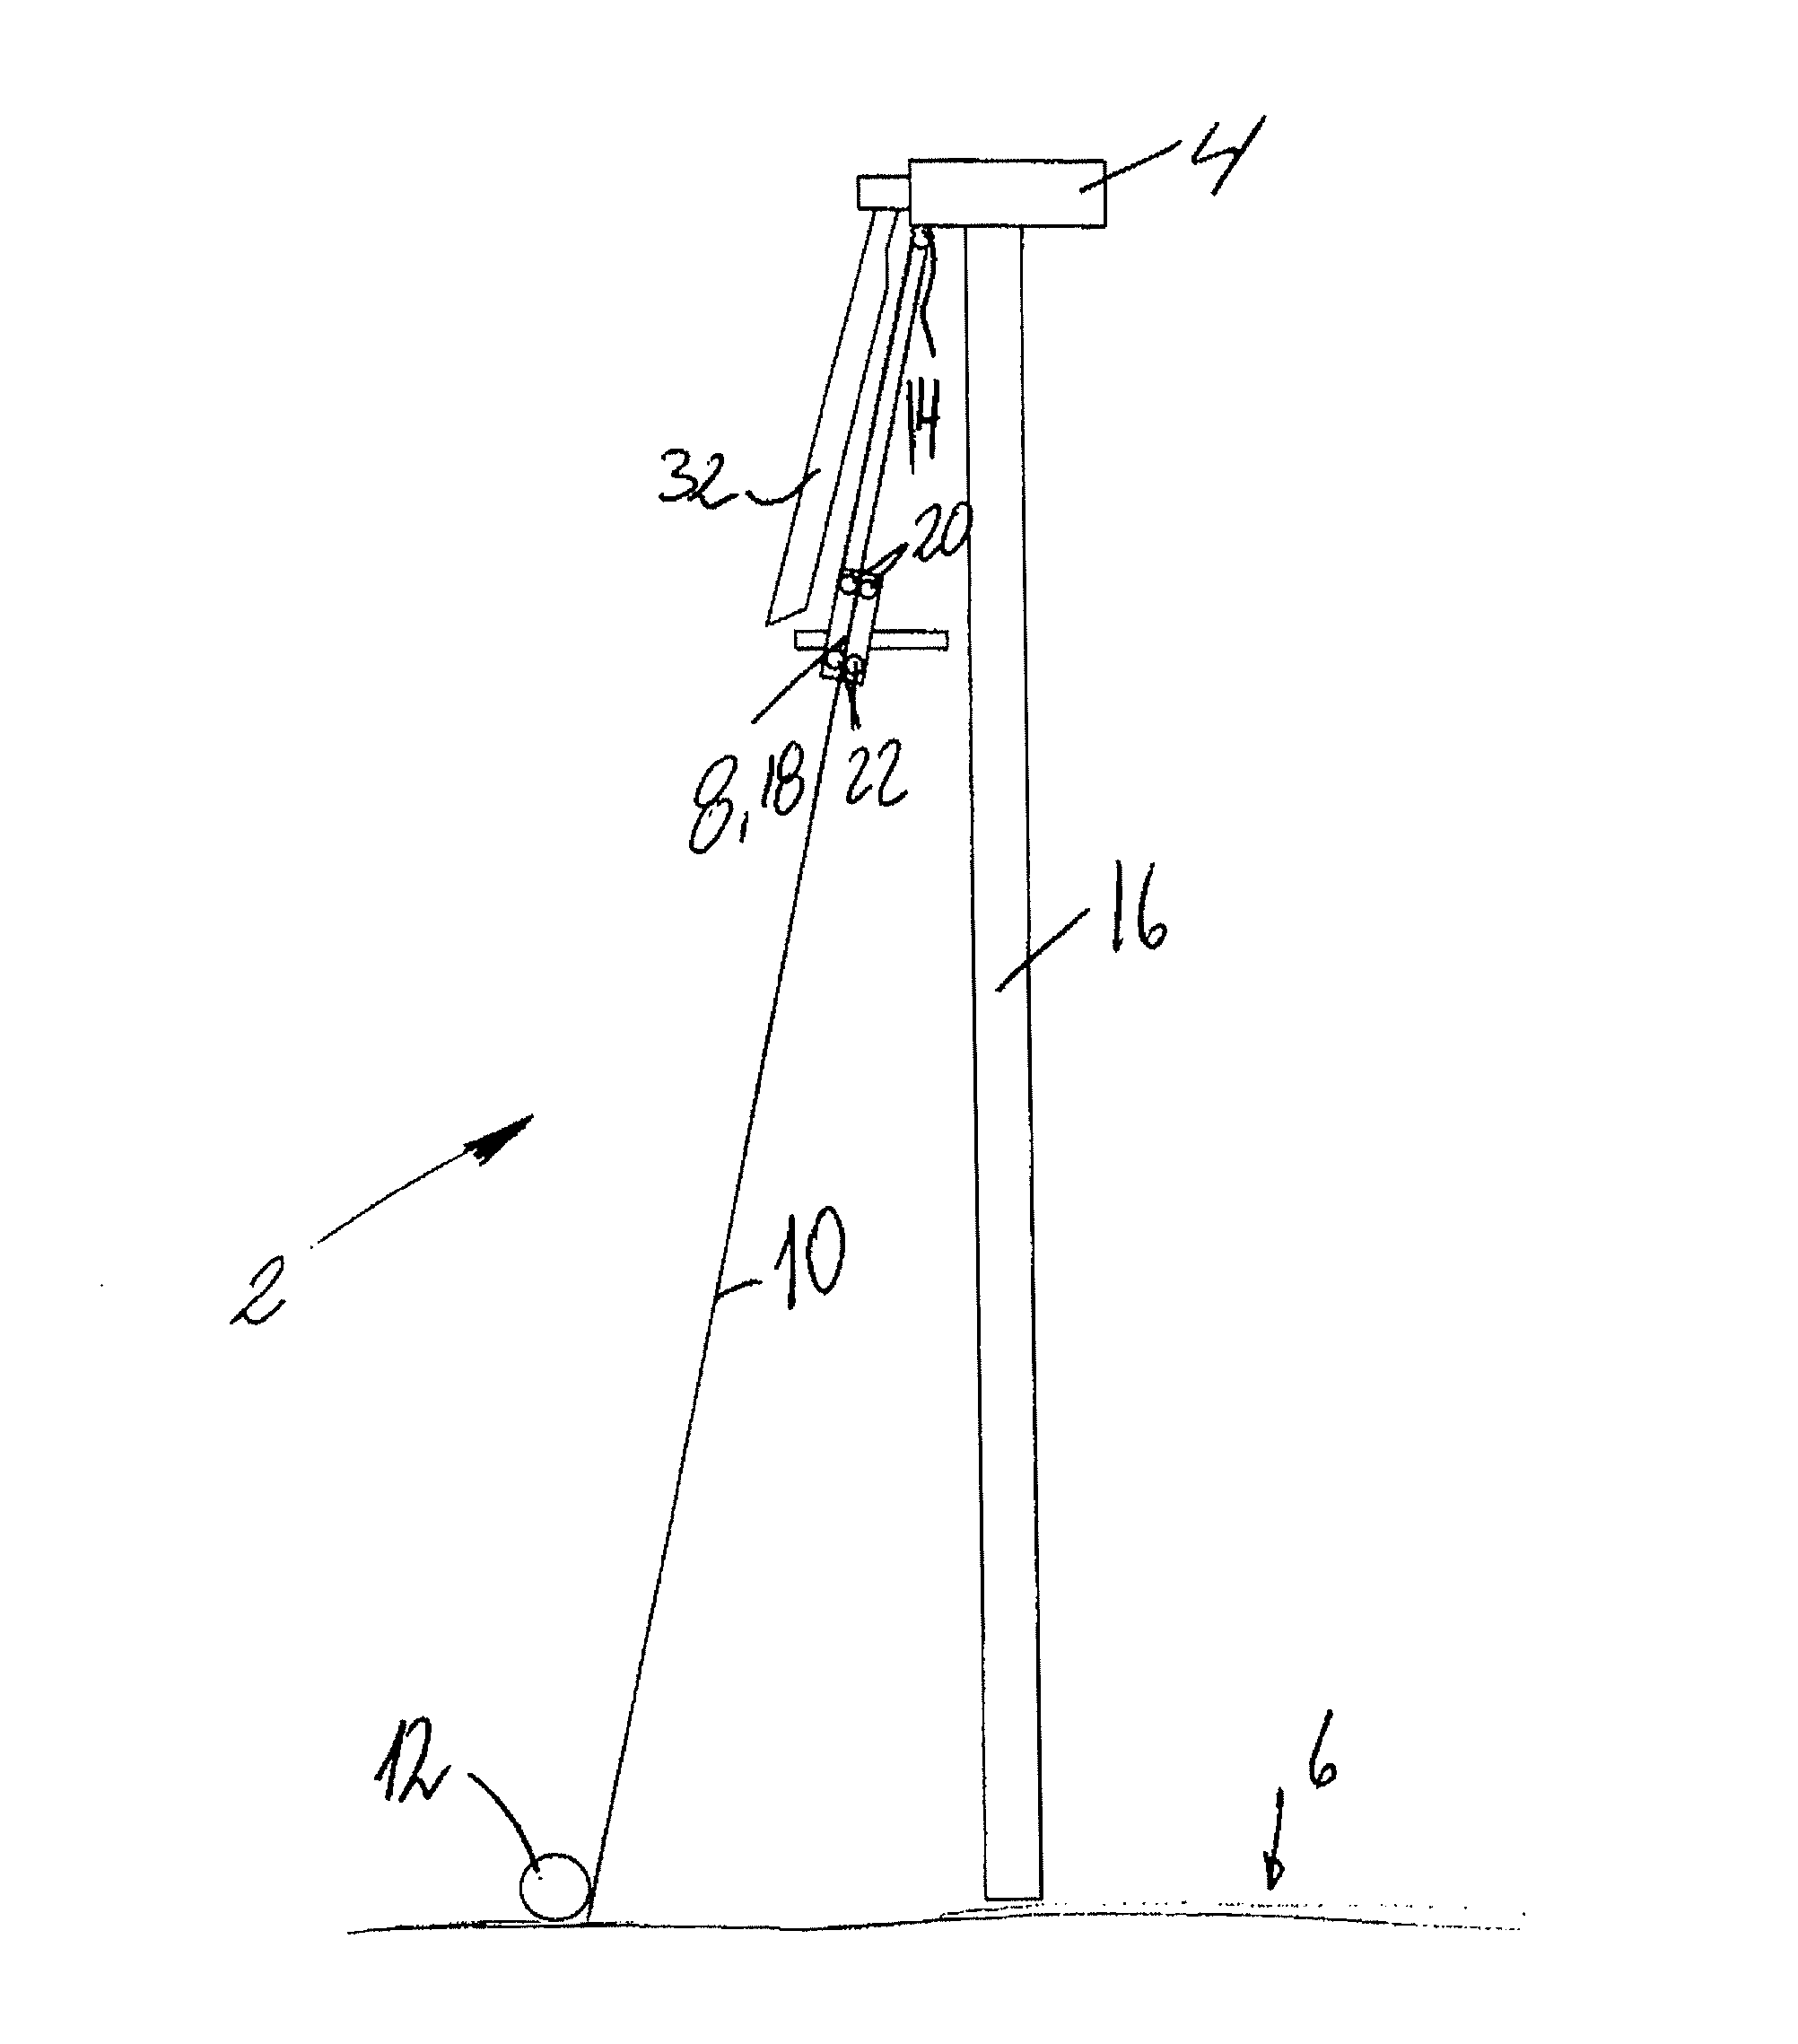 Device for establishing admittance and transport of cargo to and from a wind turbine construction above ground level